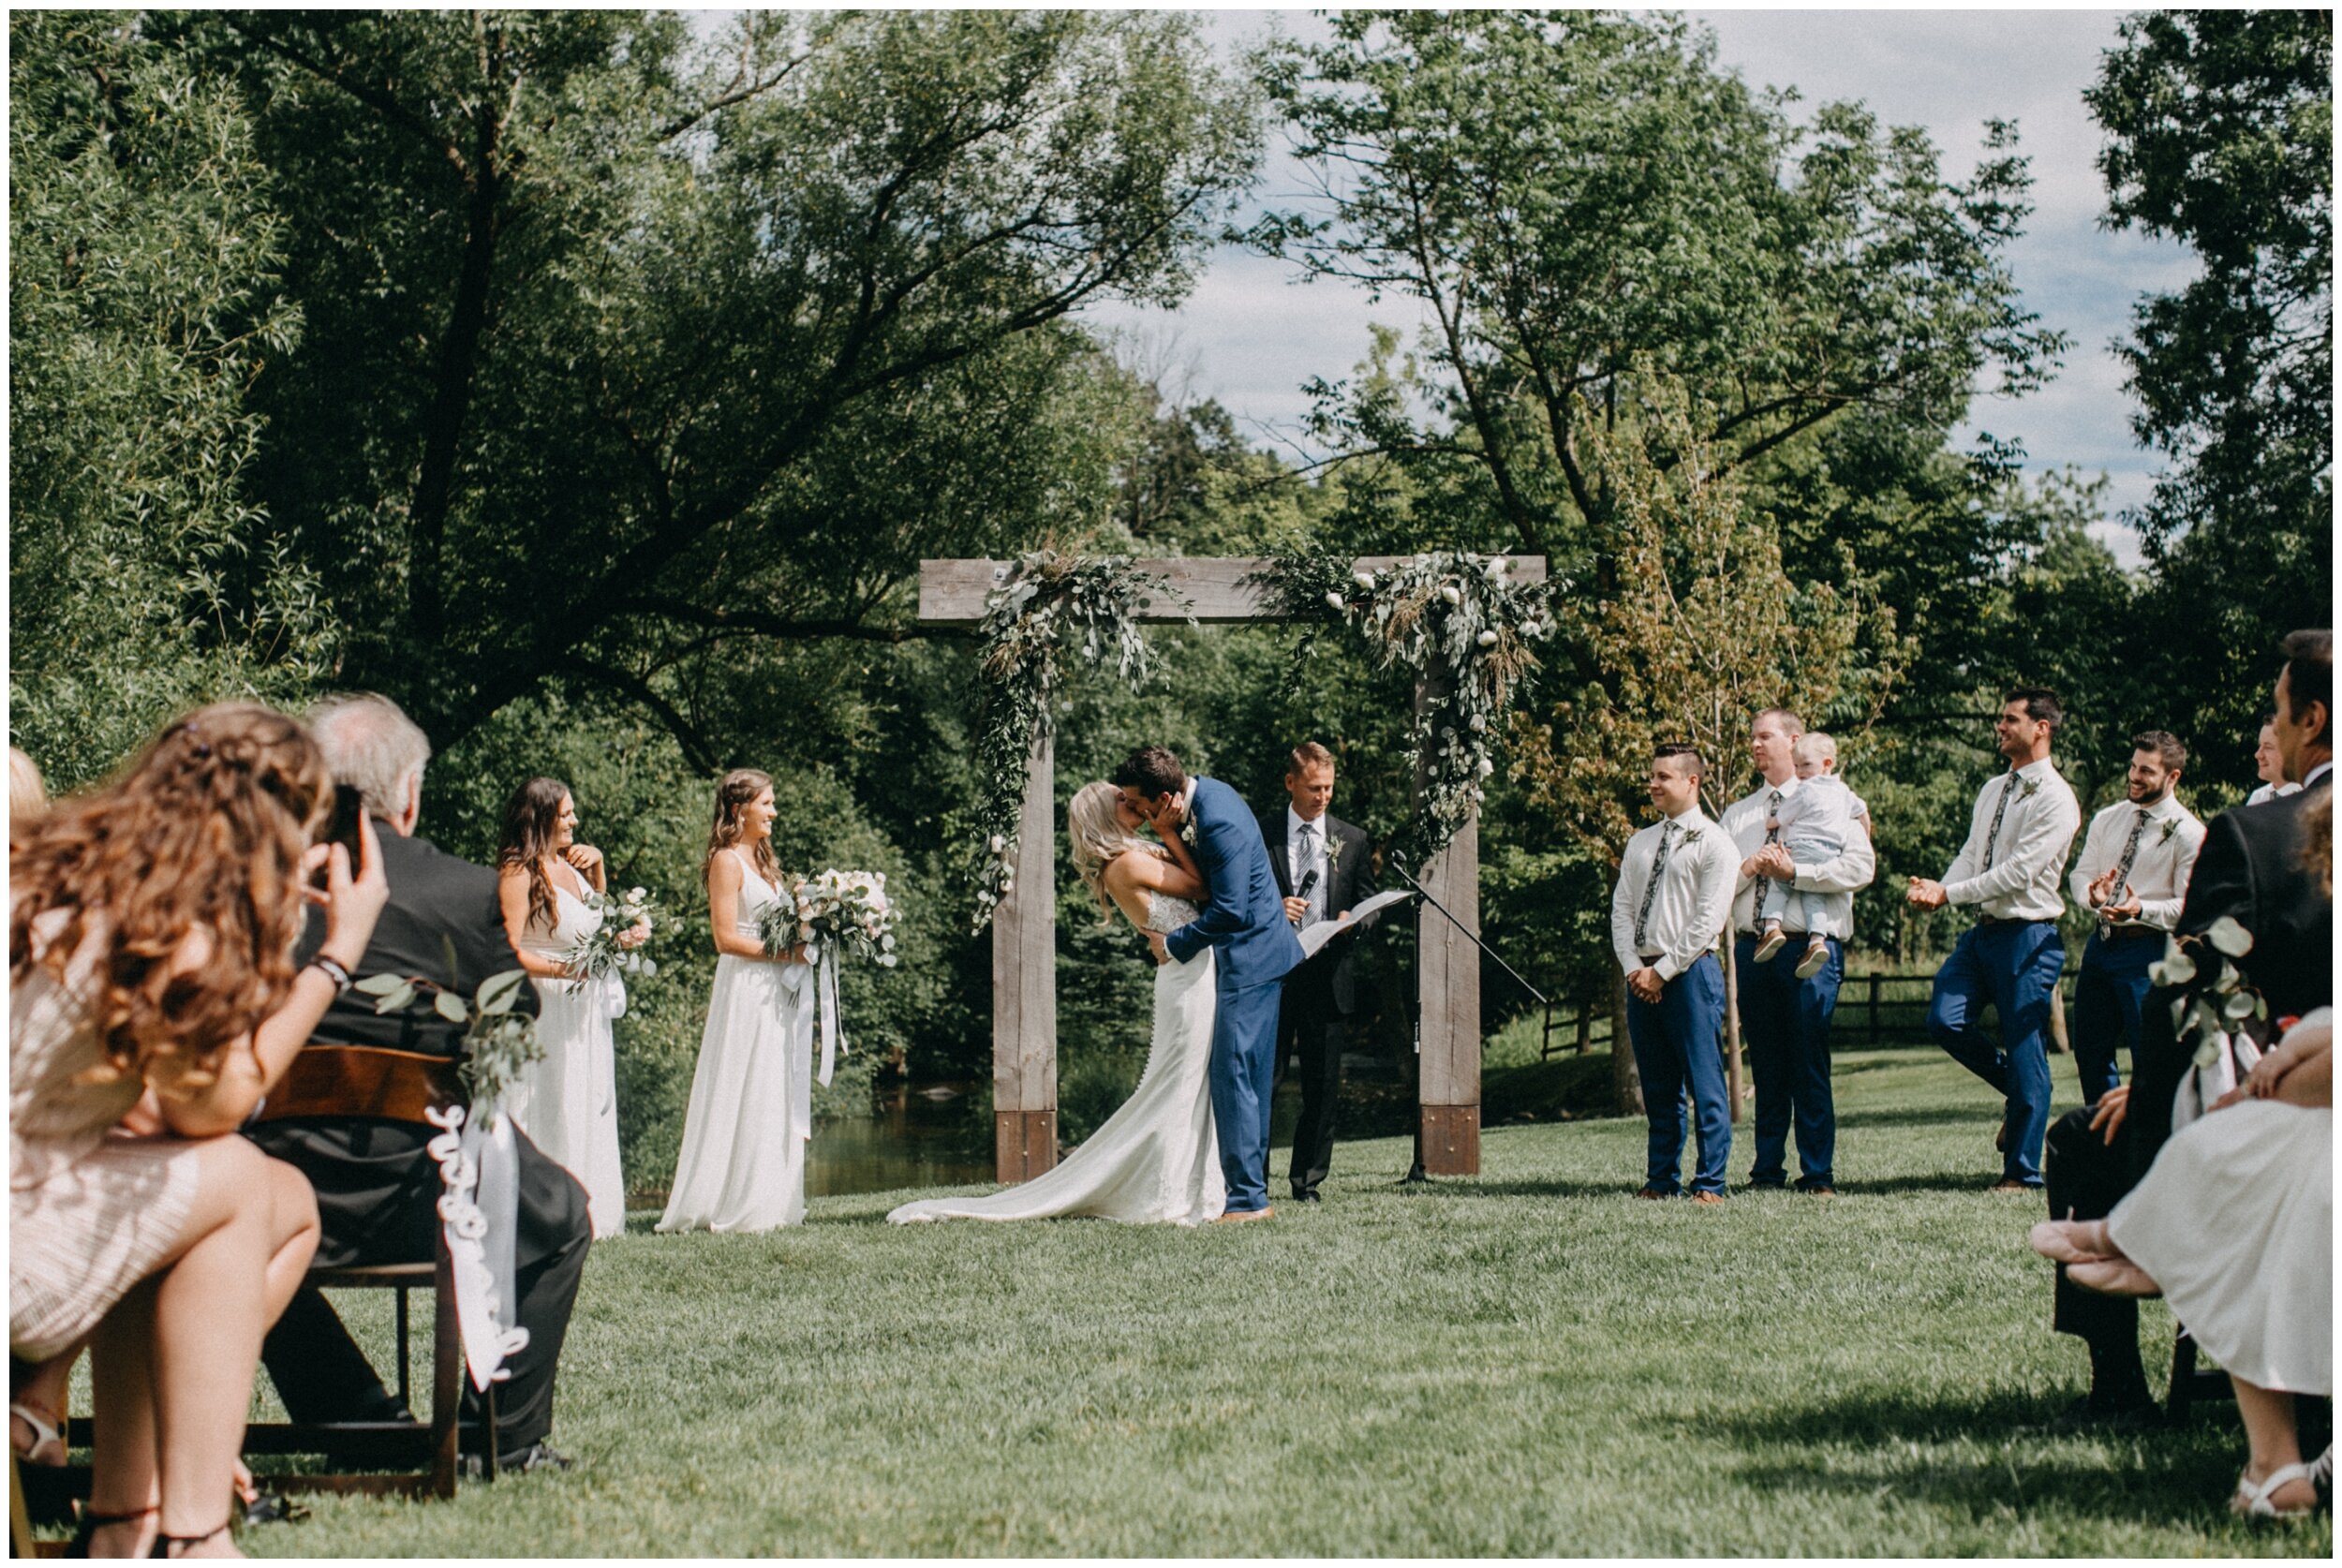 Bride and groom first kiss during romantic Minnesota barn wedding ceremony